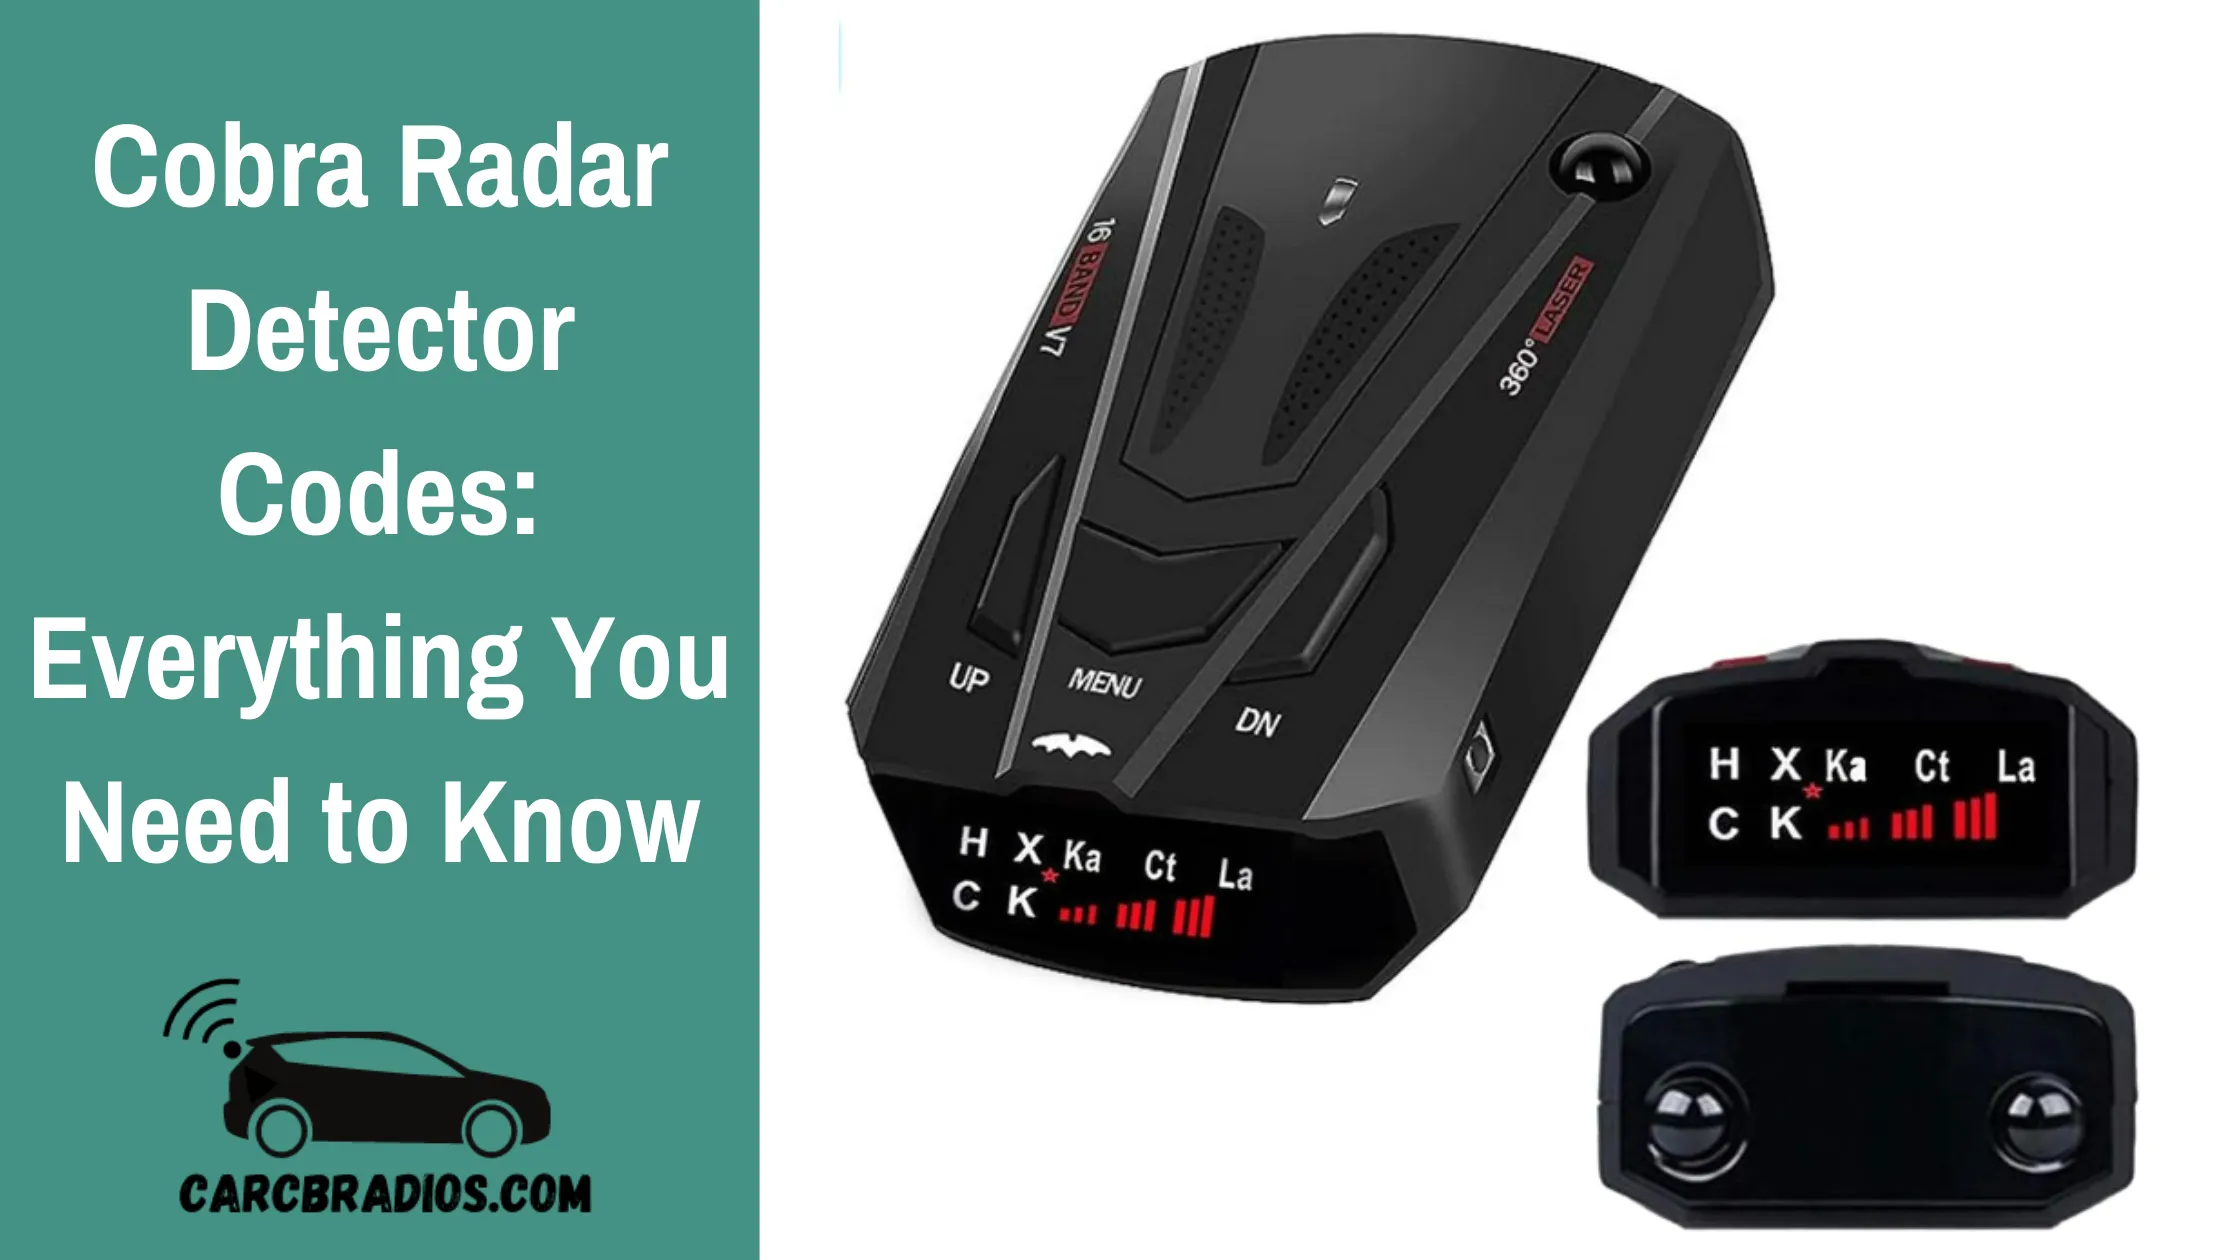 As a driver, it's important to understand the different Cobra radar detector codes and the meanings behind the alerts they produce. Cobra detectors use three primary codes: X, K, and Ka, which refer to the frequencies of cops' radar guns. It's crucial to have a wide range of frequency detection to ensure maximum coverage and protection.